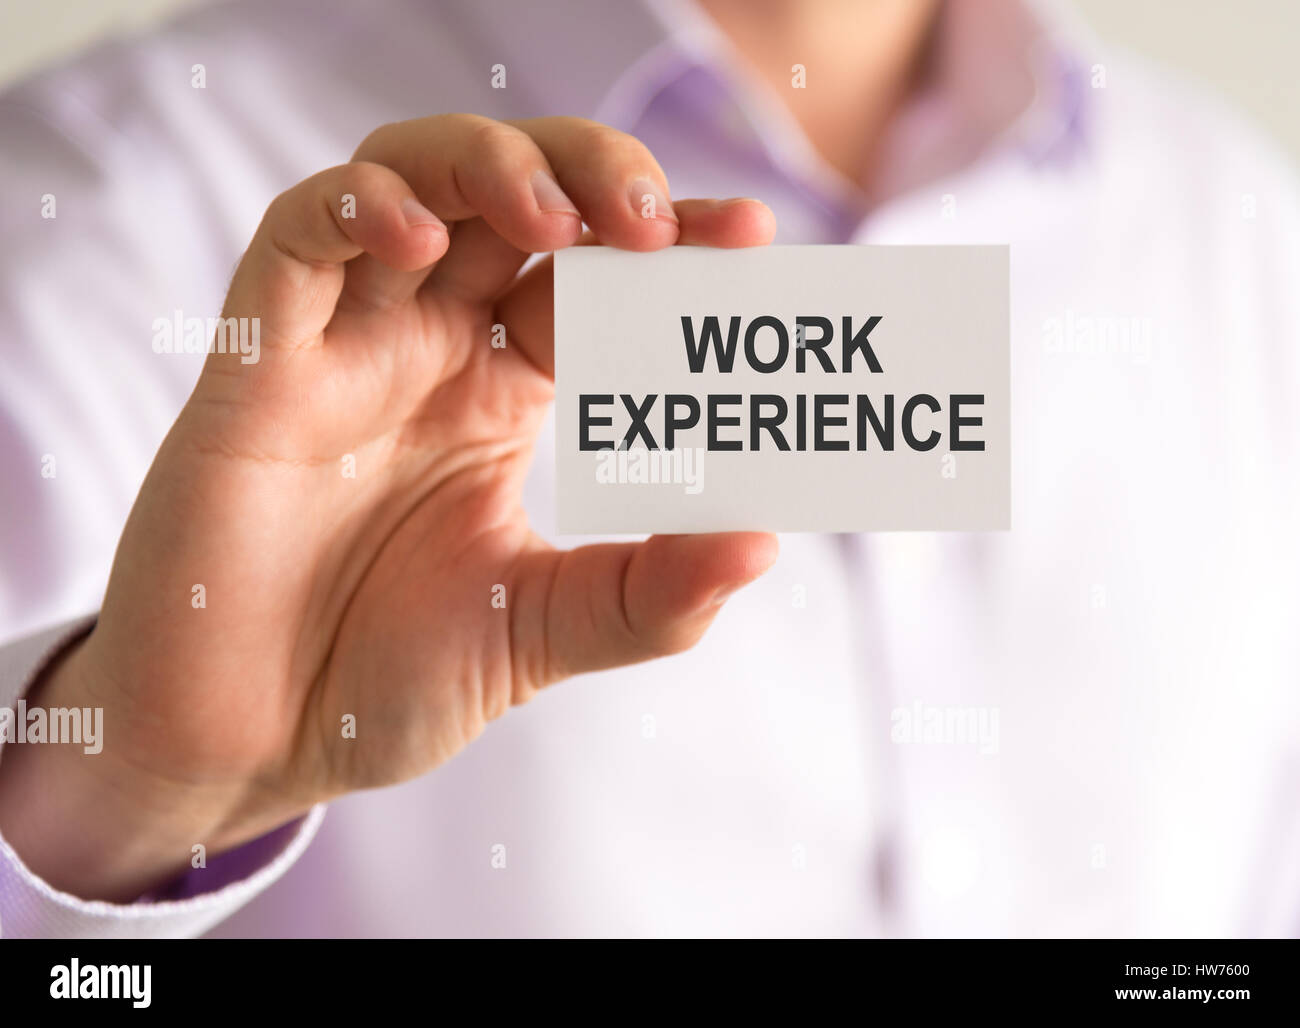 Closeup on businessman holding a card with WORK EXPERIENCE message, business concept image with soft focus background Stock Photo